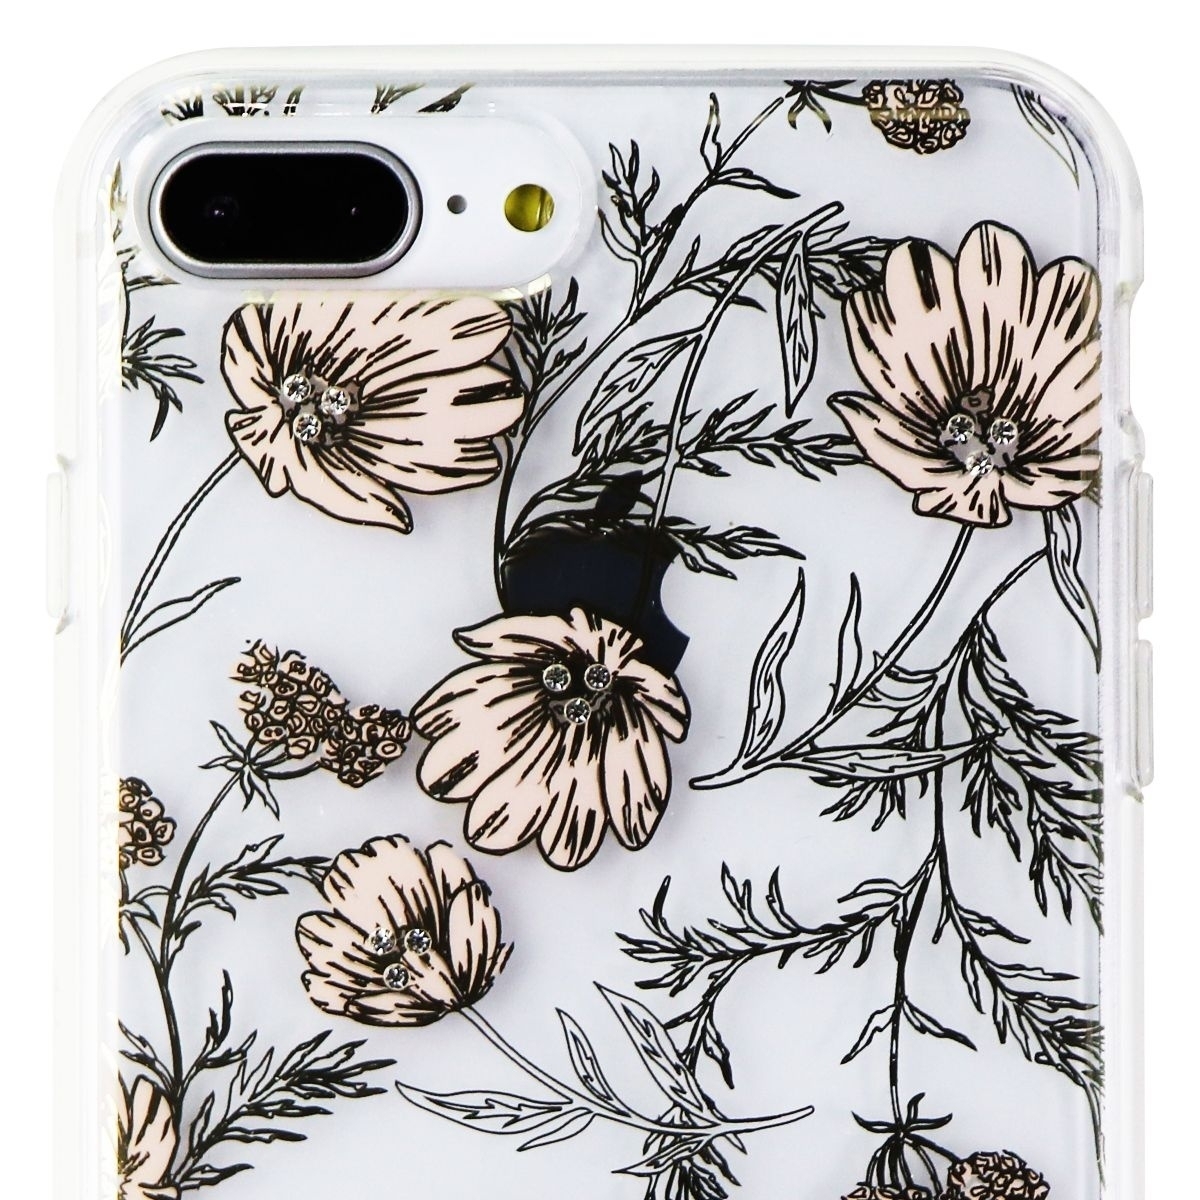 Kate Spade Hybrid Case For IPhone 8 Plus / 7 Plus - Clear / Pink Blossoms / Gems